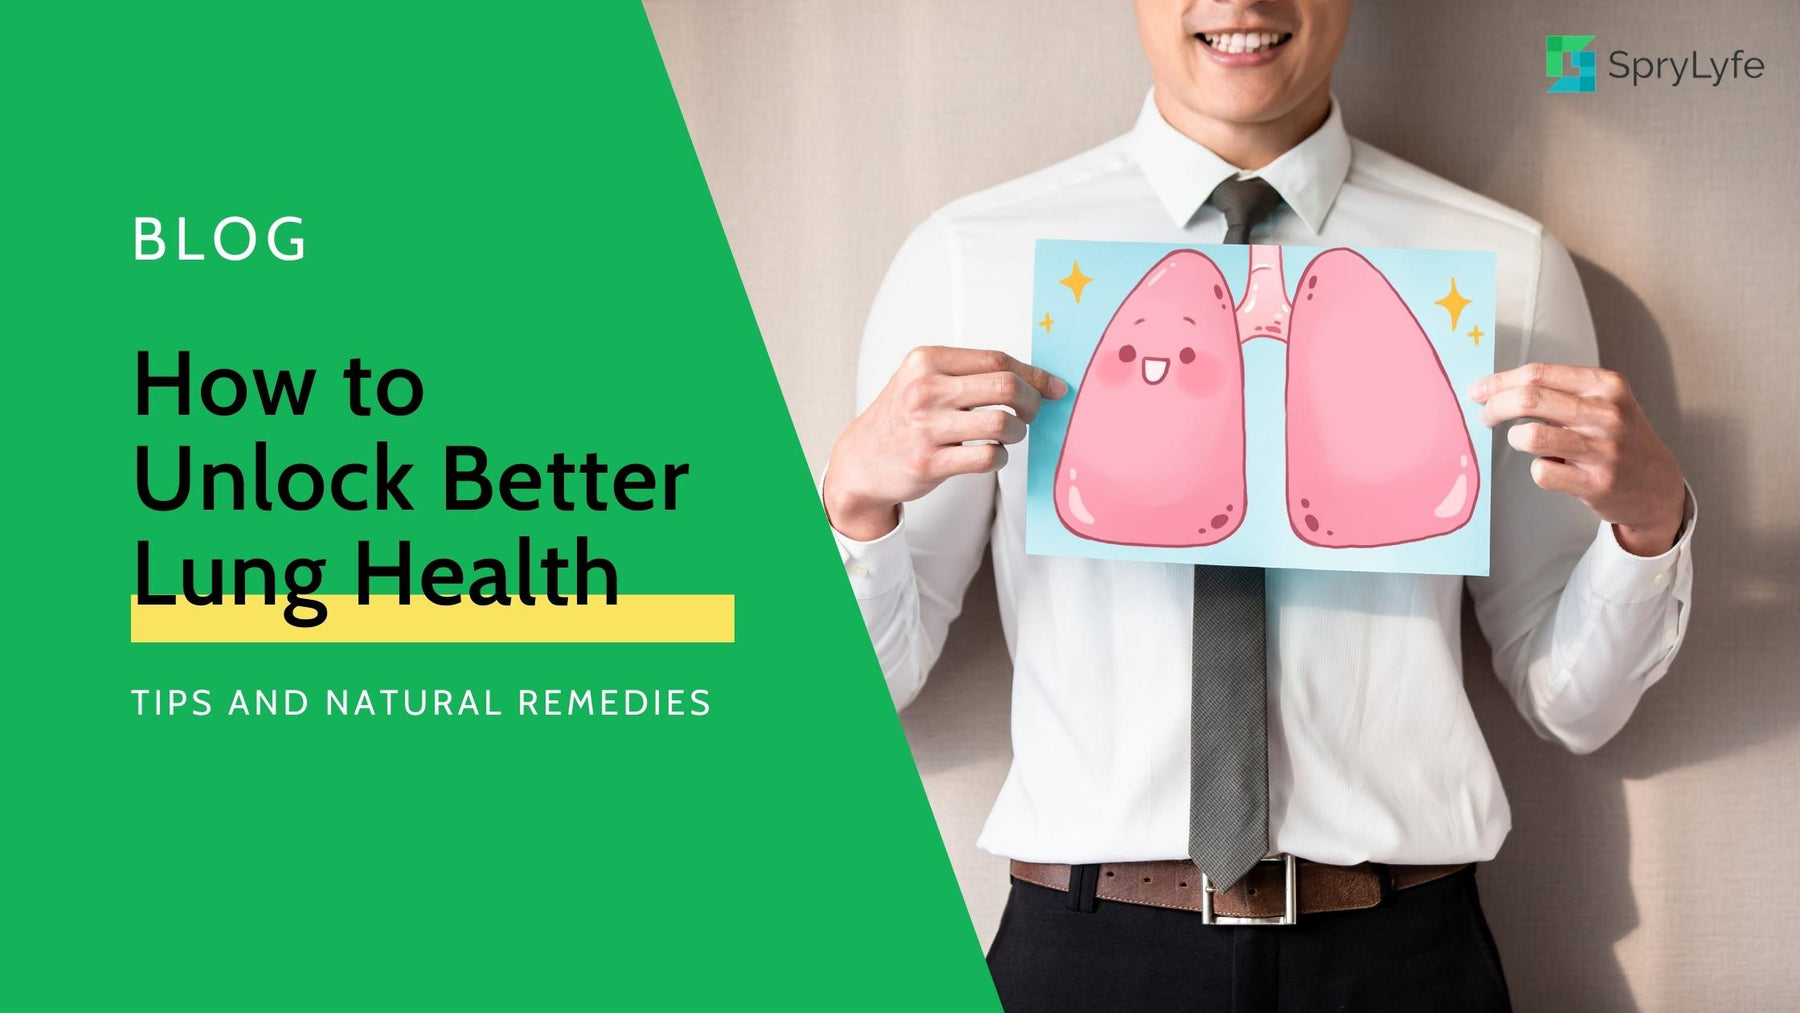 How to Unlock Better Lung Health: Tips and Natural Remedies